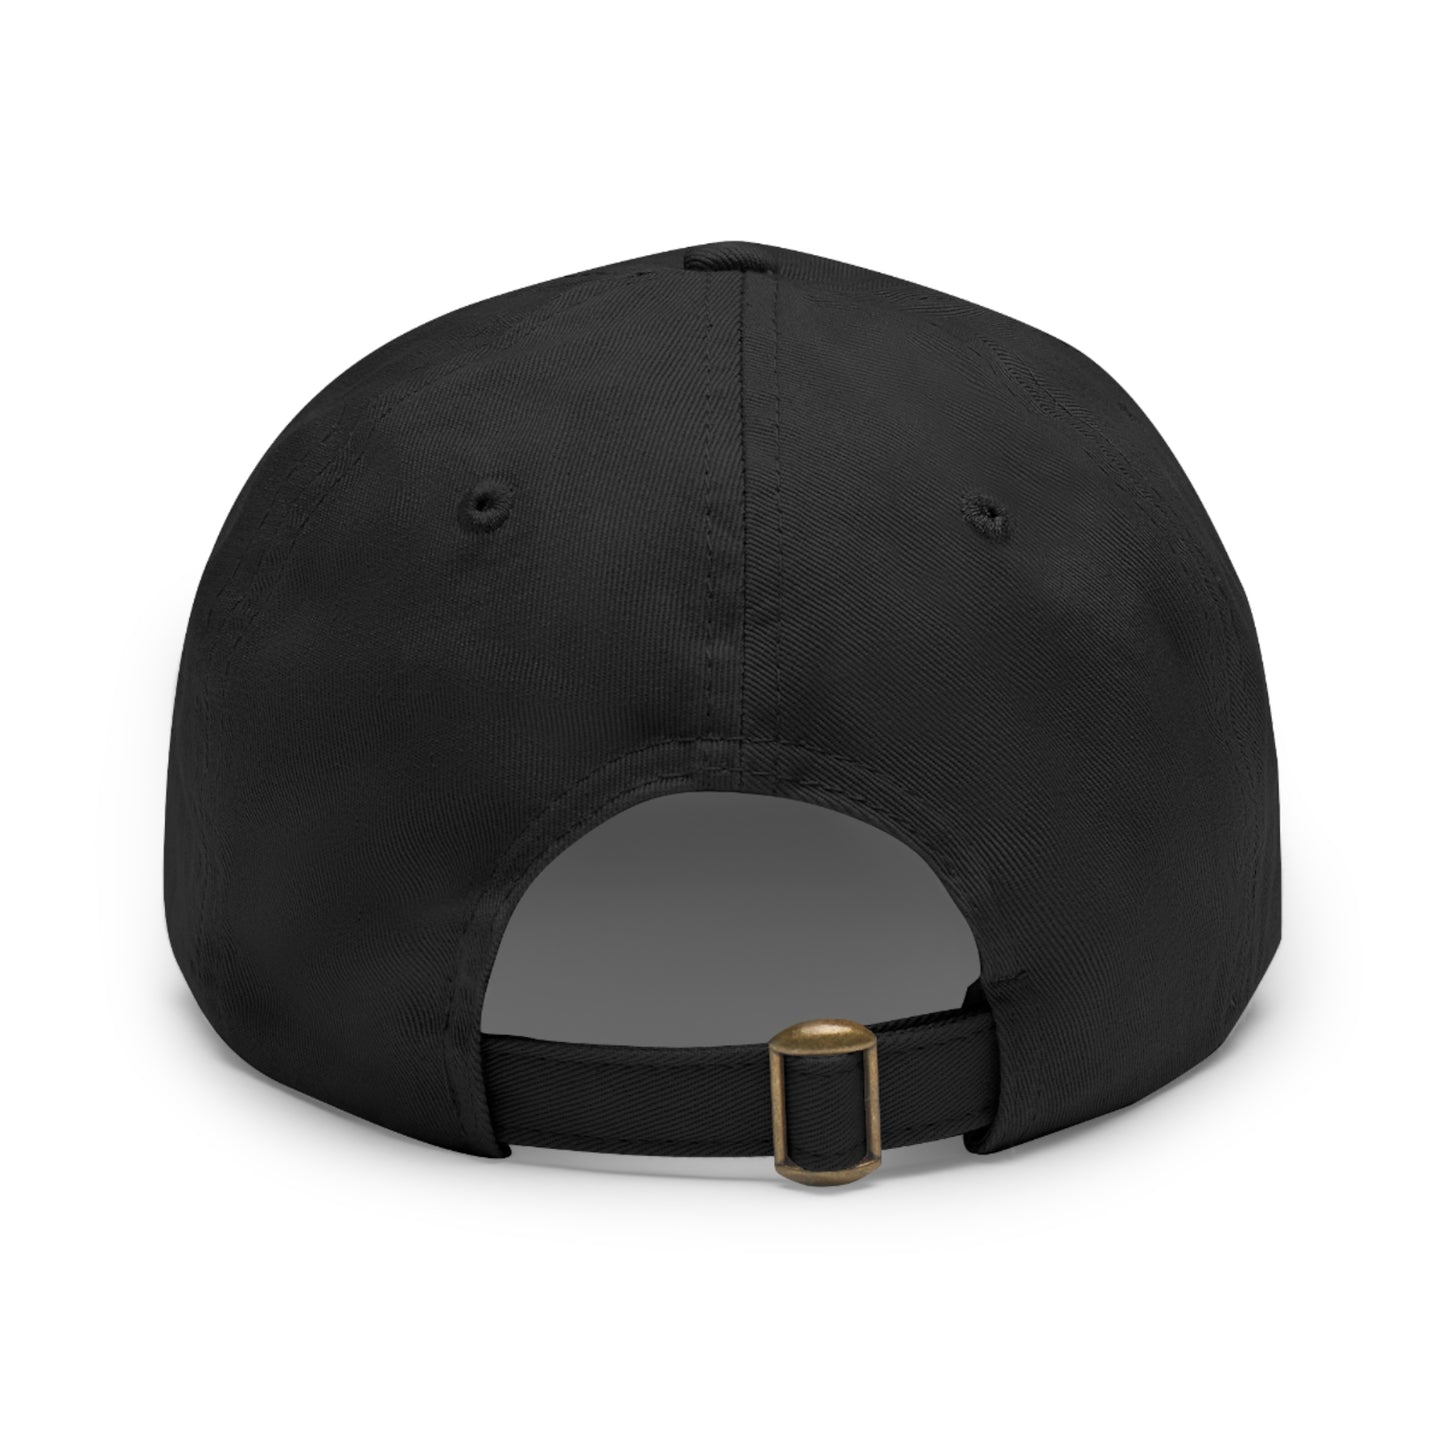 SOJO Dad Hat with Leather Patch